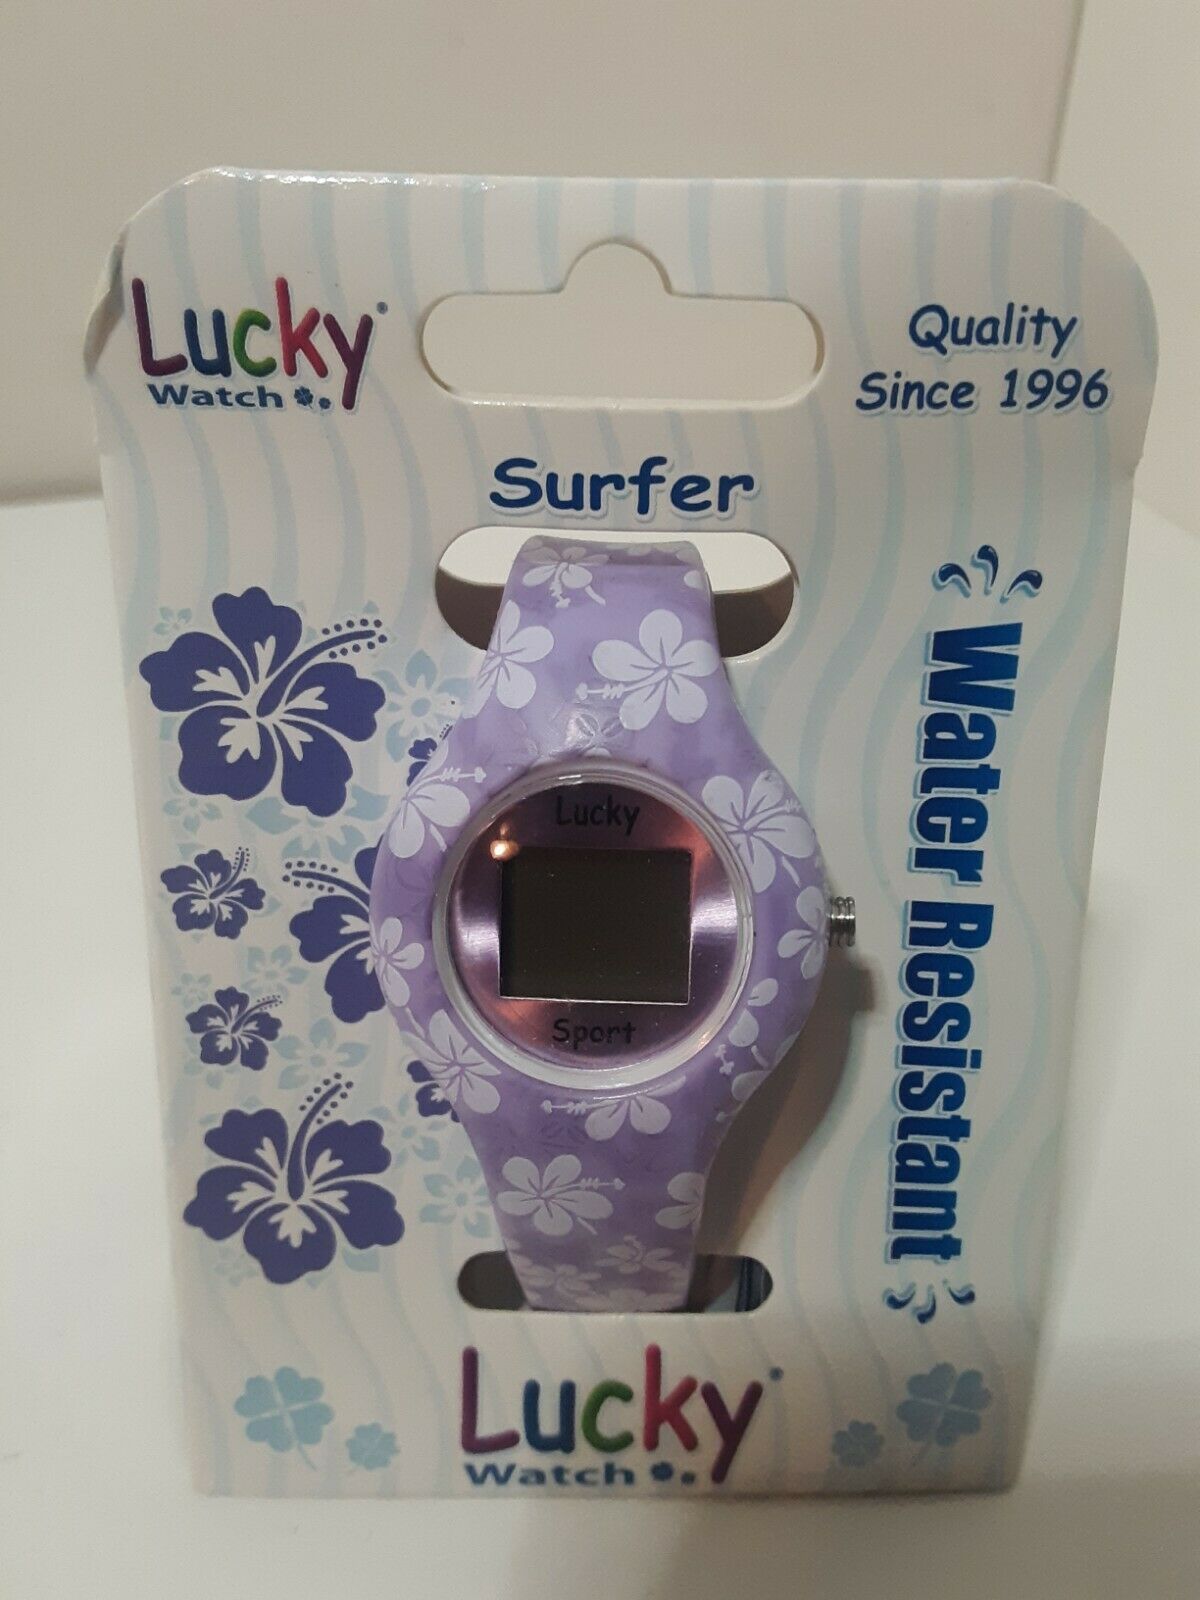 Primary image for Dingbats Lucky Surfer Water Resistant Watch Brand New